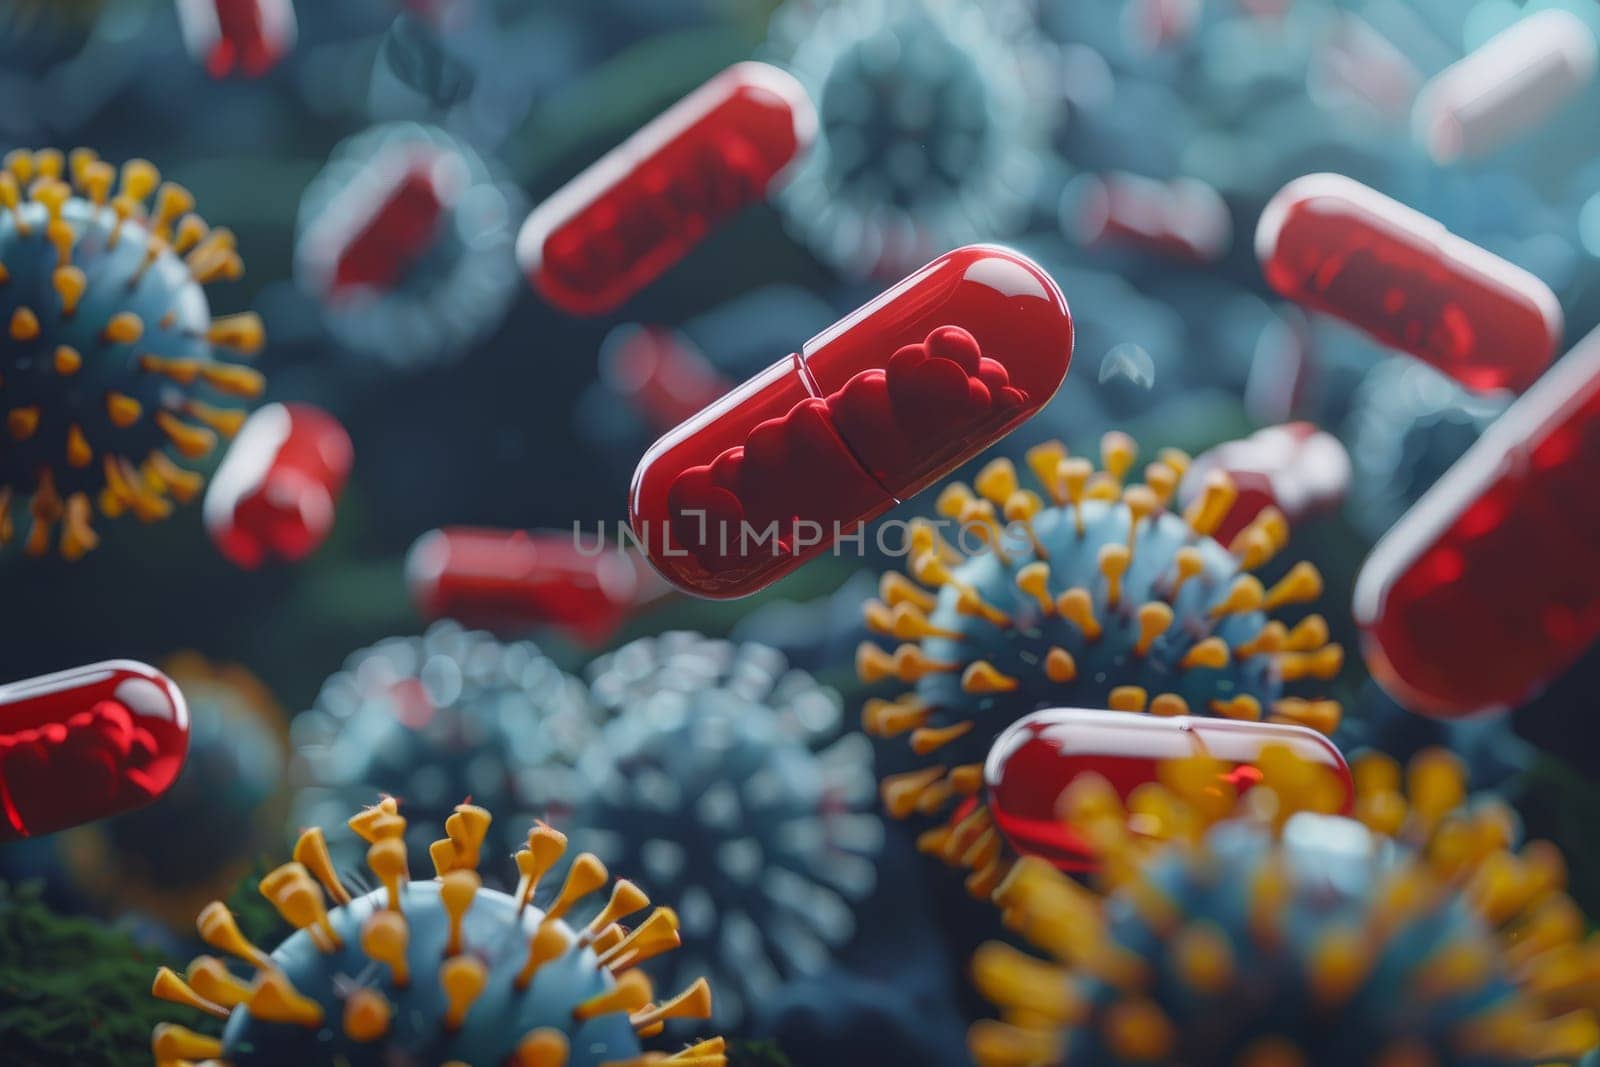 Microscopic view of viruses and bacteria cells, red capsules representing viruses and yellow spiky spheres depicting pathogens or microorganisms in abstract scientific concept by ailike